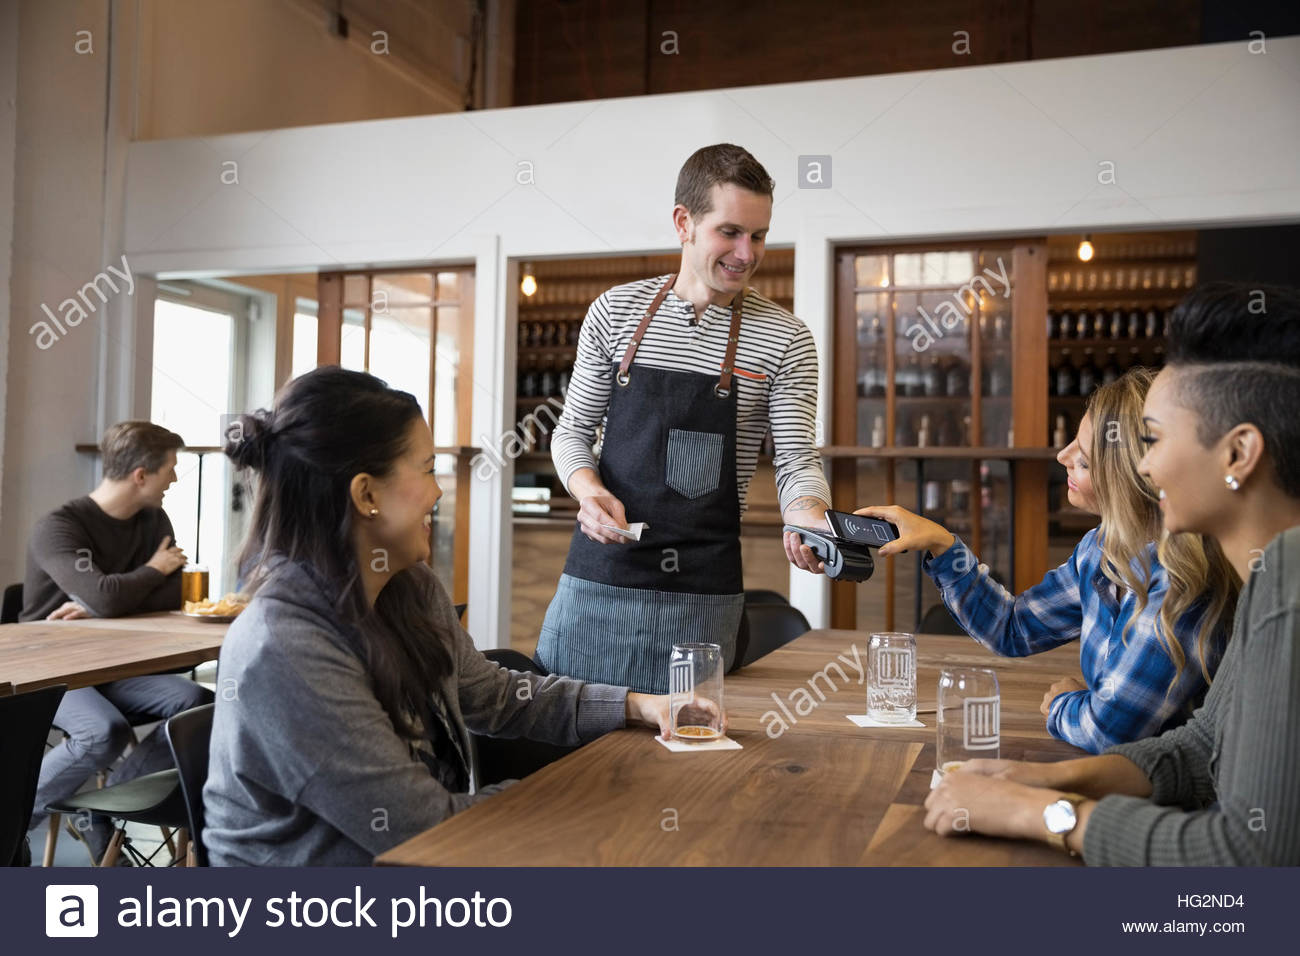 Female friends paying waiter with smart phone contactless payment in brewery tasting room restaurant Stock Photo